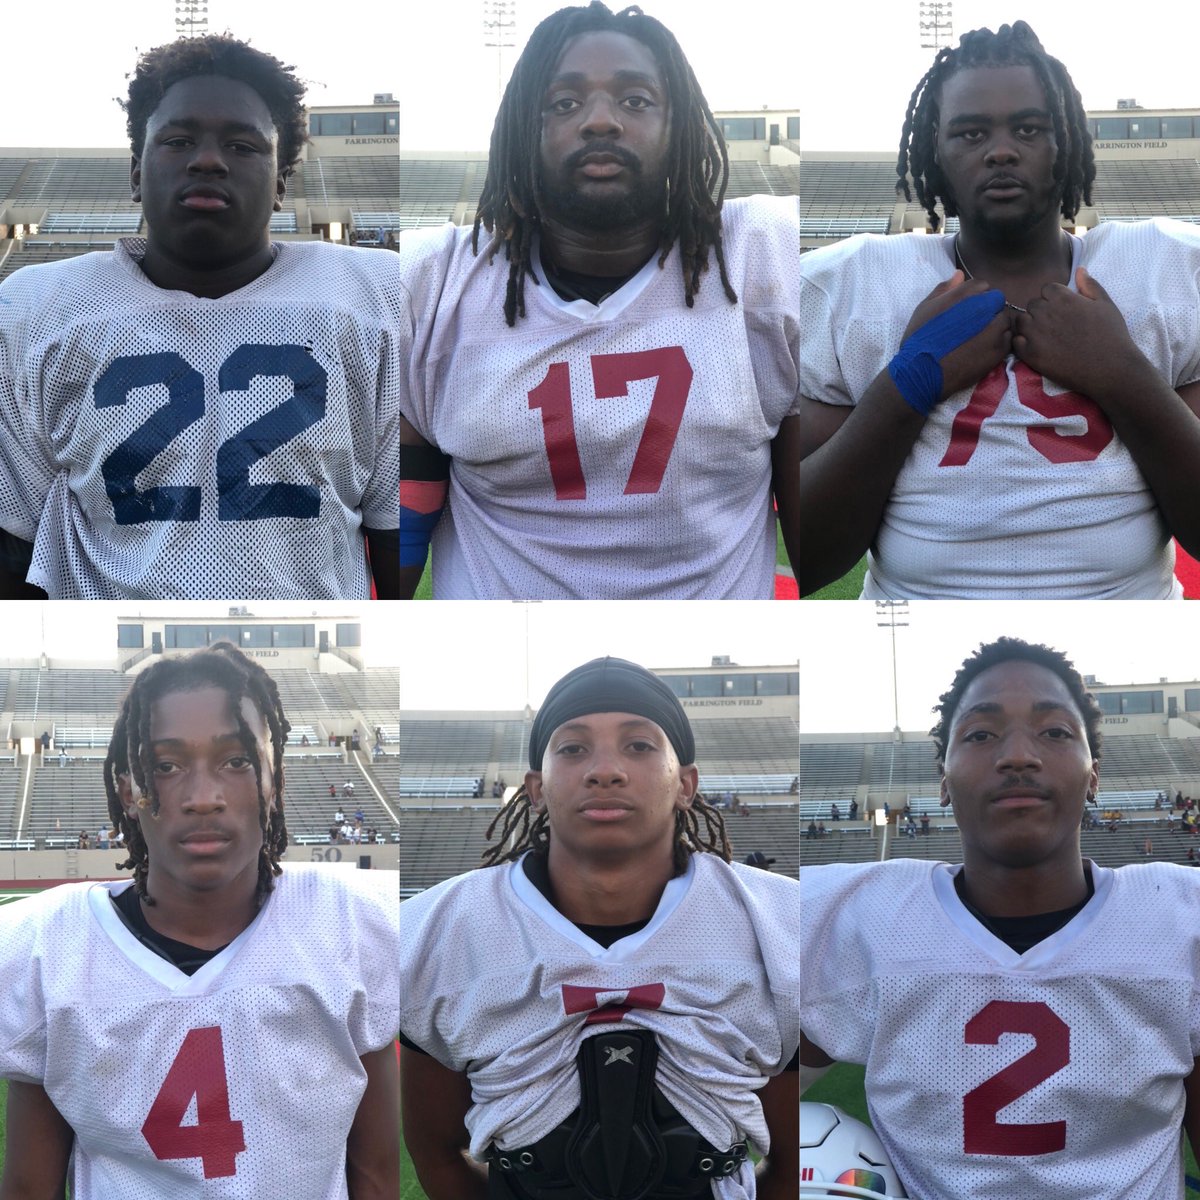 Fort Worth Southwest HS @southwestfb Standouts from scrimmage vs WH Jeremiah Hogg (DE) CO 27 Raylon Carter (DE/RB) CO 25 Devonne James (OT) CO 24 Anthony Boswell (WR/DB) CO 26 Jahbori Cooper Suttice (QB) CO 25 Martavious Boswell (DB) CO 24 #ExposeTheUnexposed